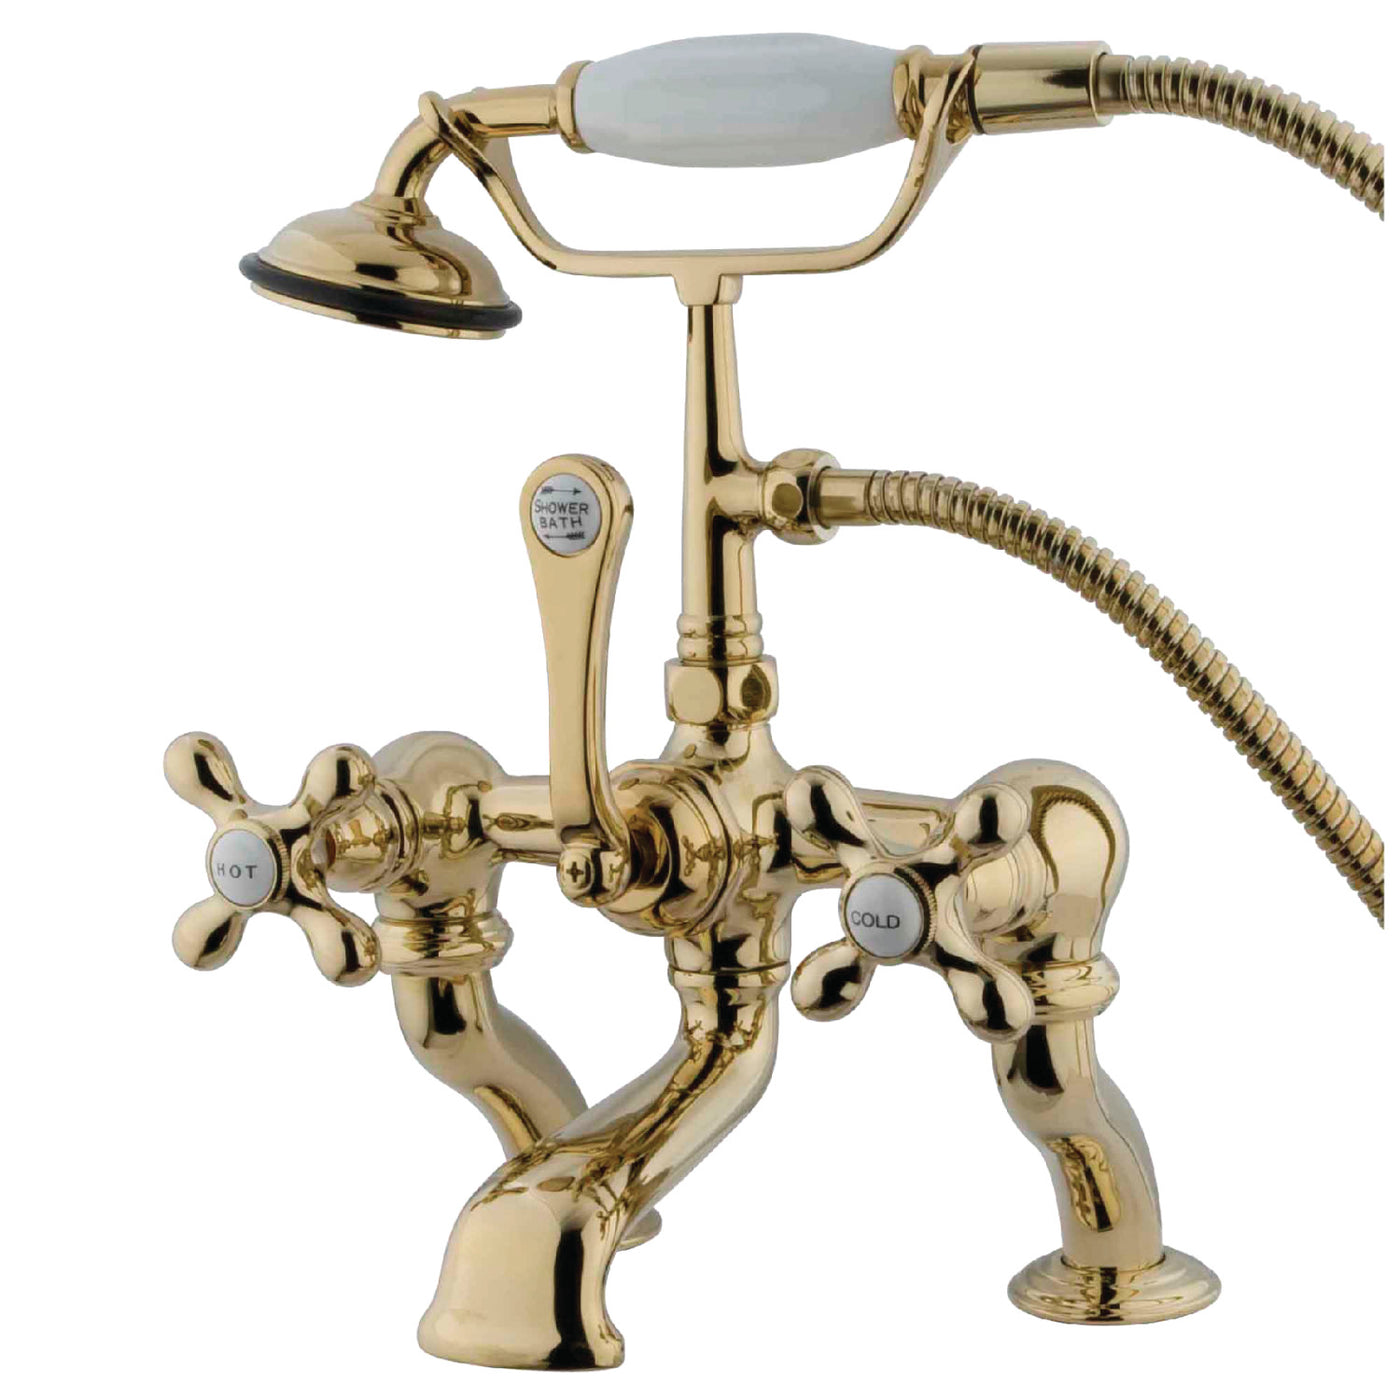 Elements of Design DT4092AX 7-Inch Deck Mount Tub Faucet with Hand Shower, Polished Brass